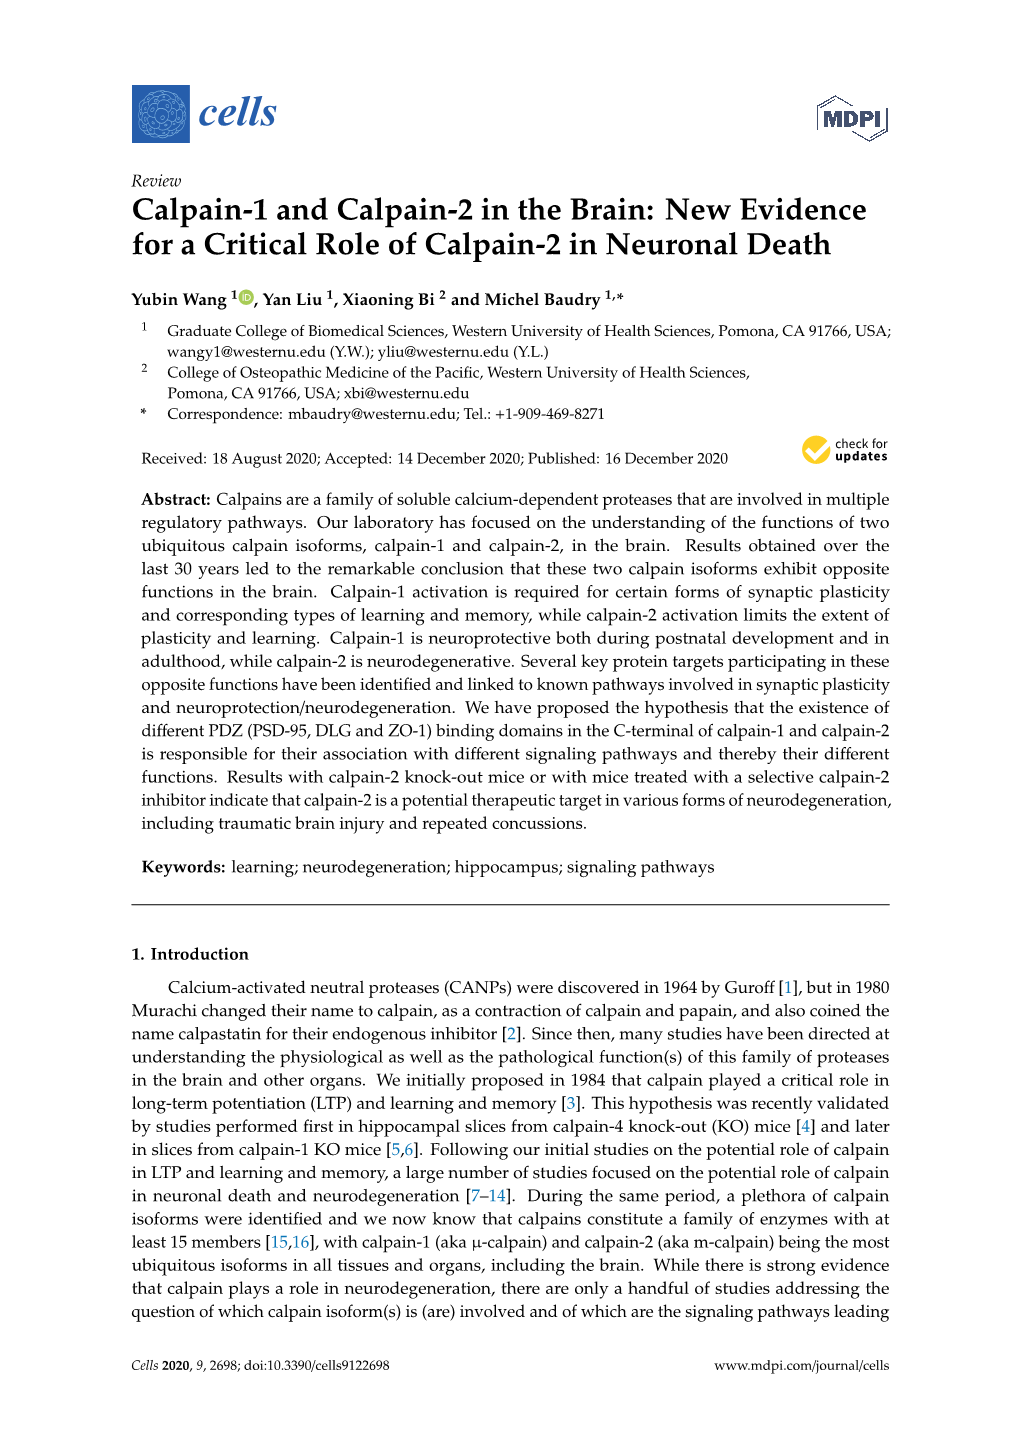 Calpain-1 and Calpain-2 in the Brain: New Evidence for a Critical Role of Calpain-2 in Neuronal Death